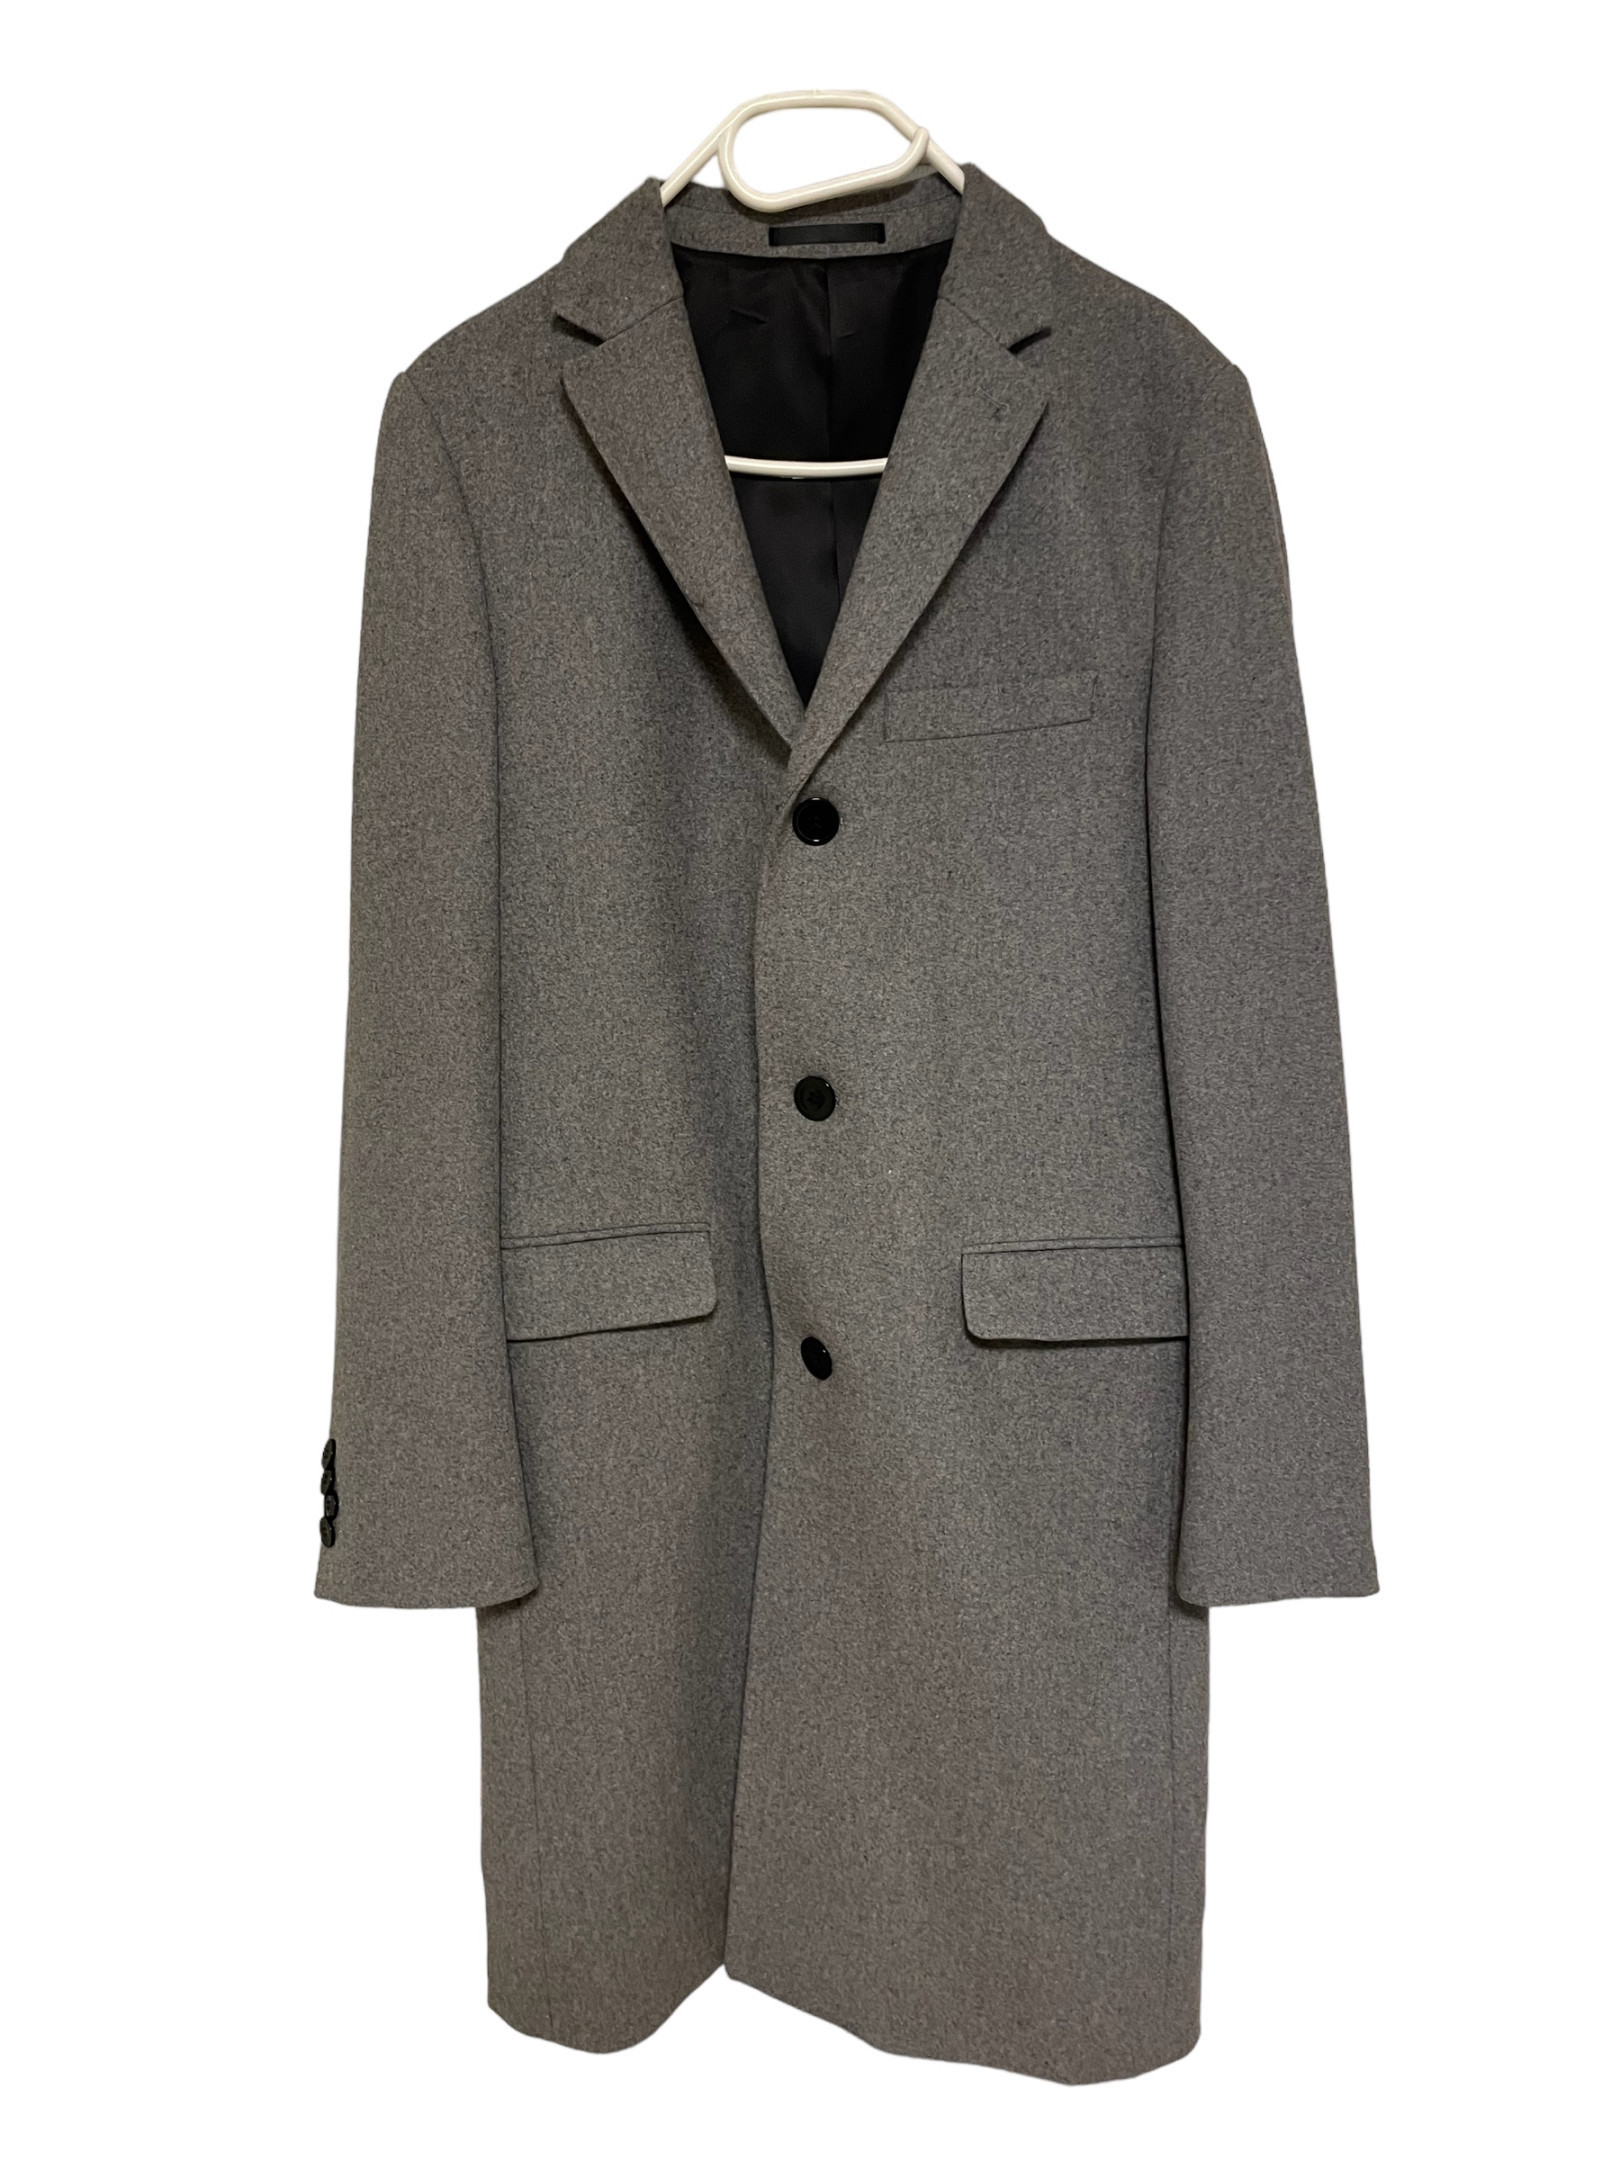 Grey coat from H&M